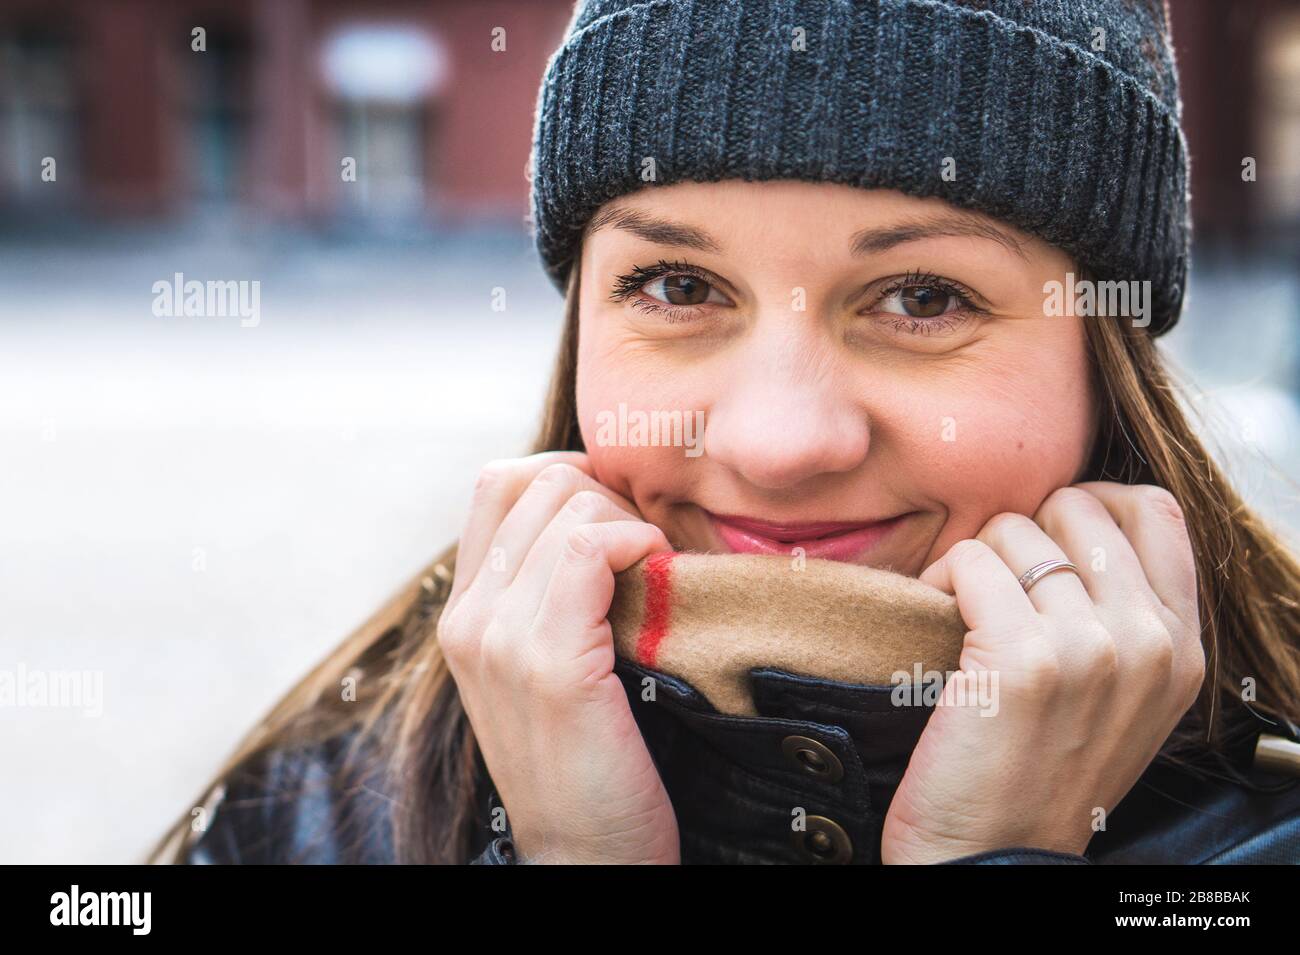 Cute woman wearing a beanie in winter. Happy and smiling person hiding behind scarf and holding collar with hands. Outdoor lifestyle portrait in city. Stock Photo